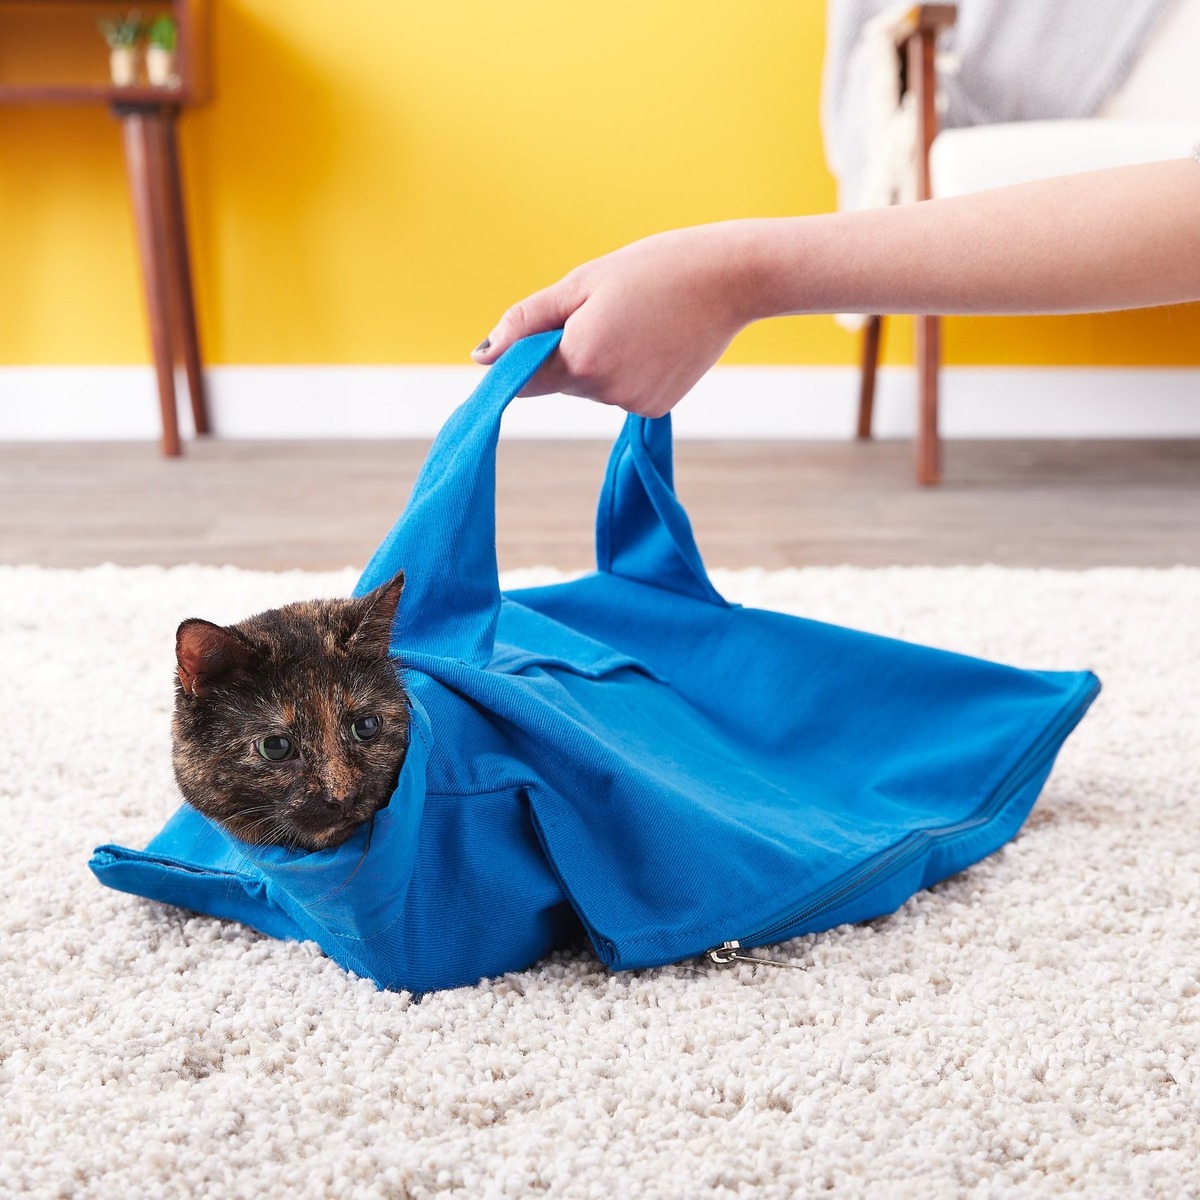 How To Put A Cat In A Carrier Using A Pillowcase